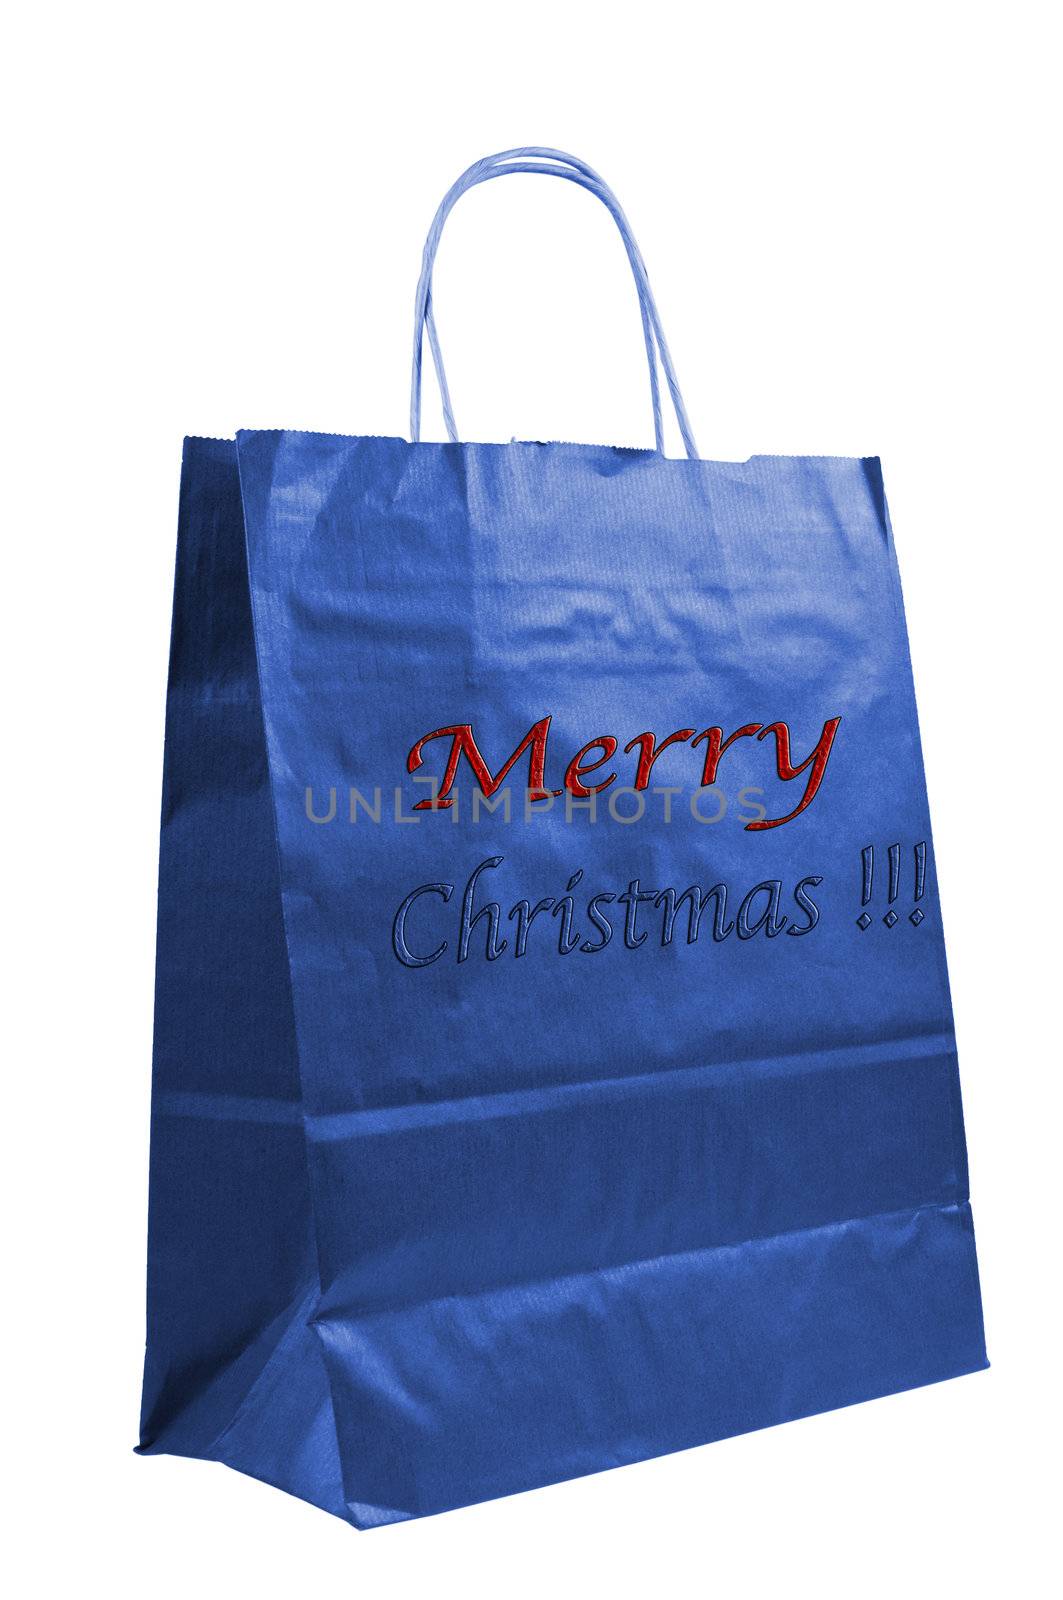 Merry Christmas paper bag close up isolated